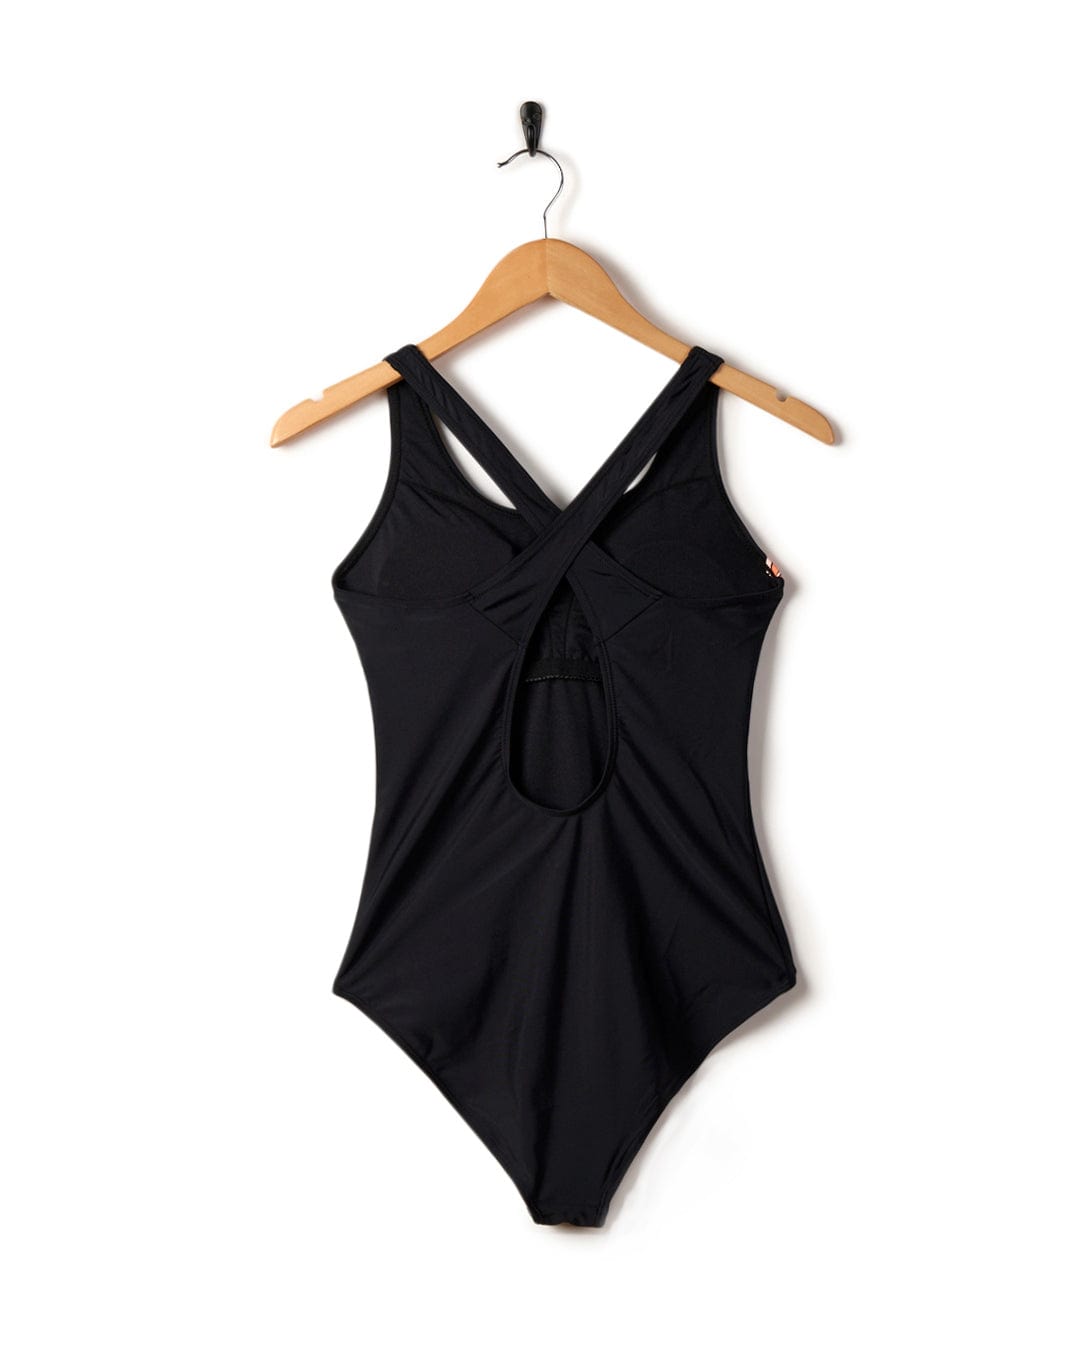 Corrine Retro - Recycled Womens Swimsuit - Black by Saltrock, with a crossed back design, hanging on a wooden hanger against a white background.